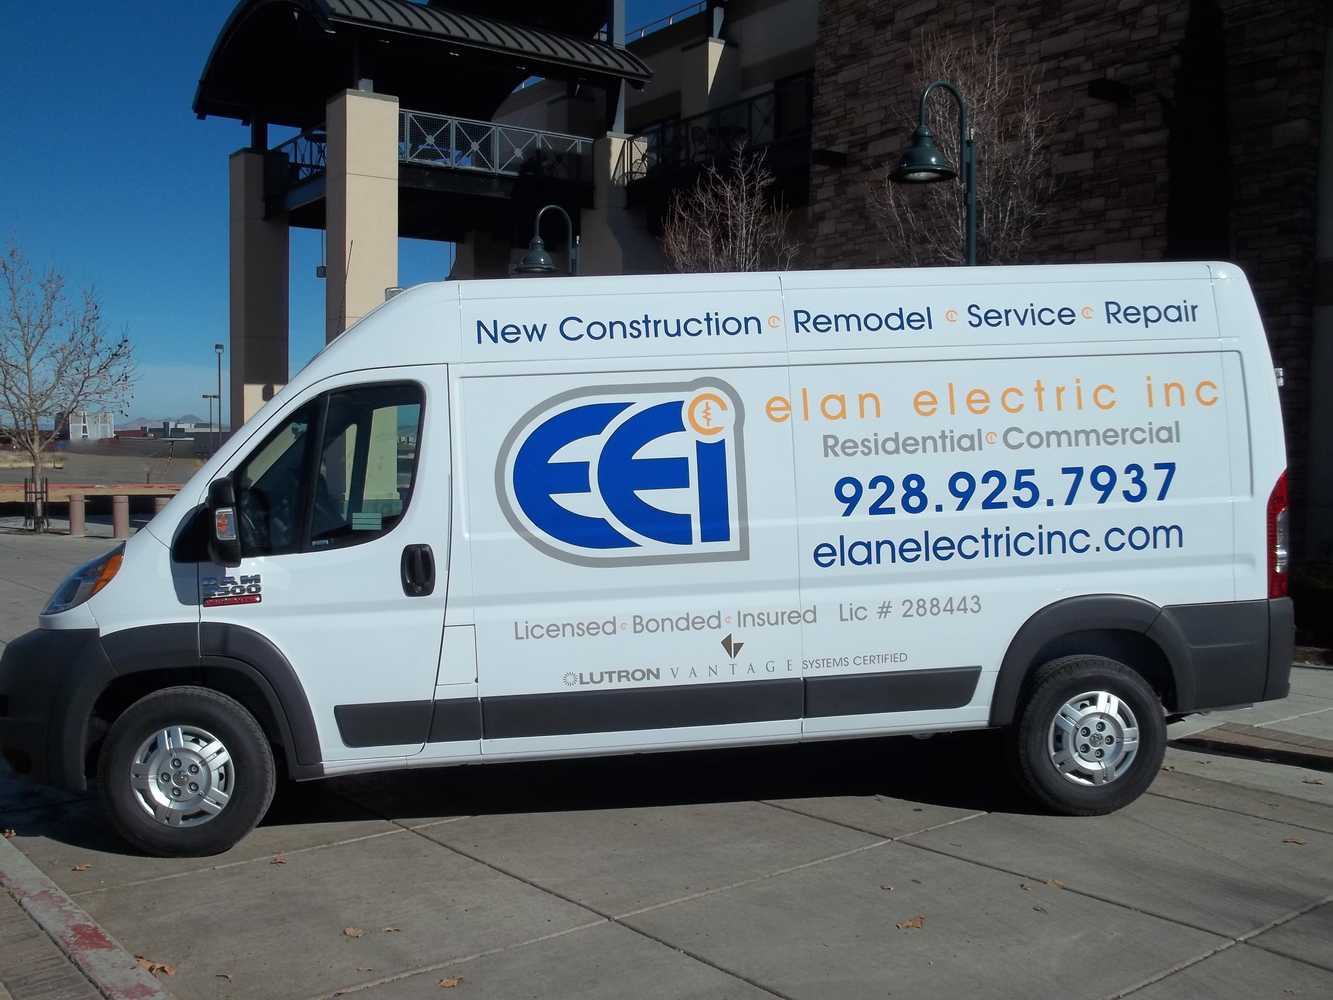 Photo(s) from Elan Electric Inc.